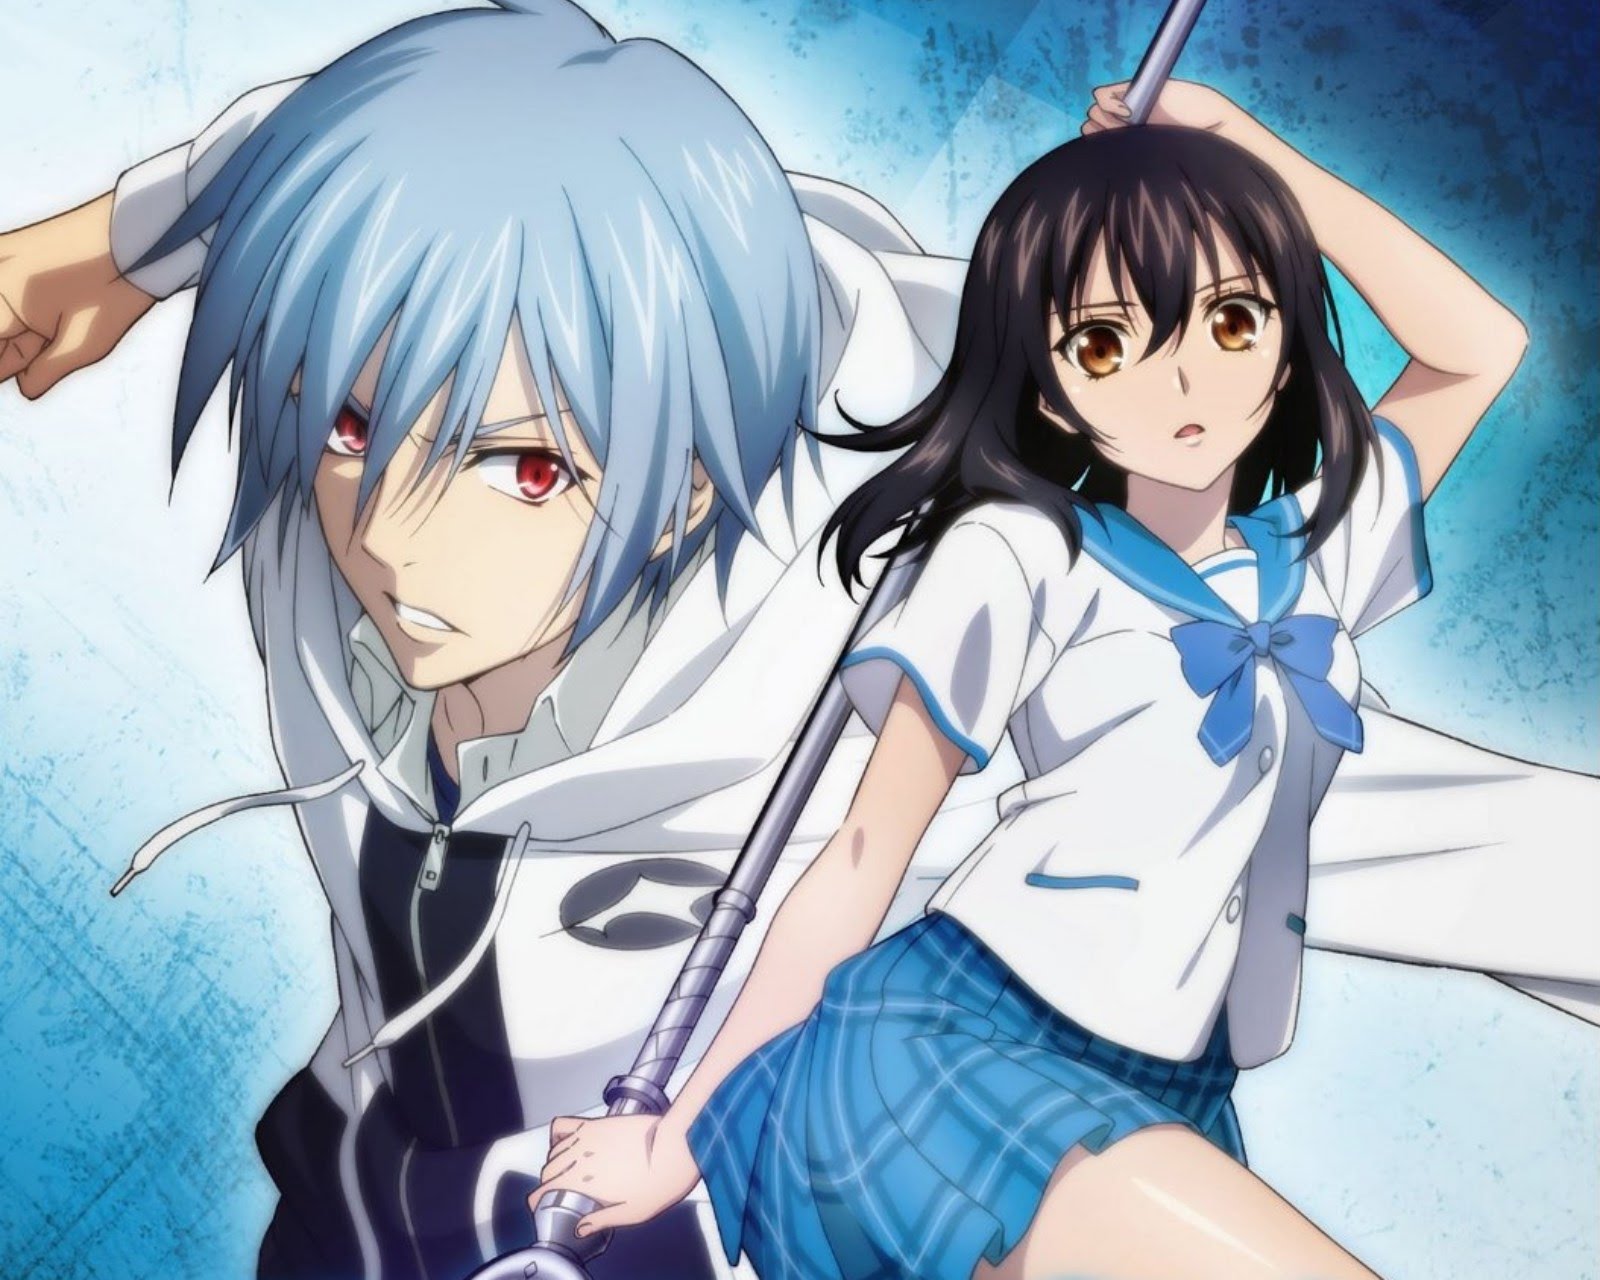 Action anime with little romance? - Forums 